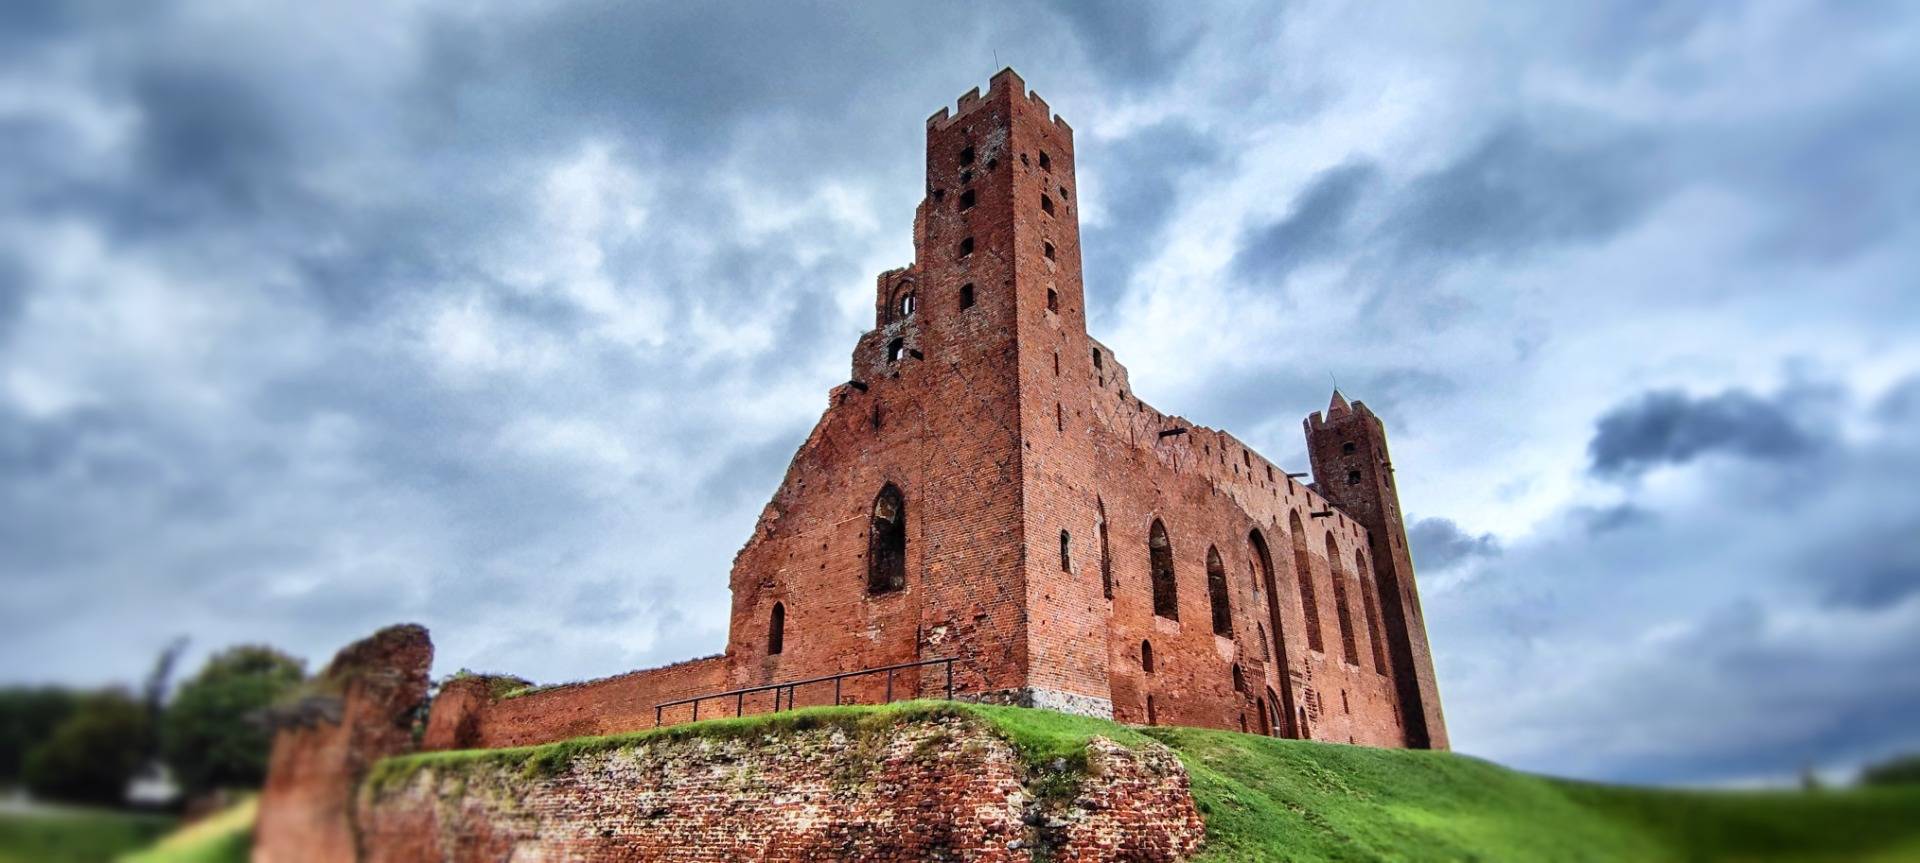 At the real country of Game of Thrones: Battles, bricks and knights